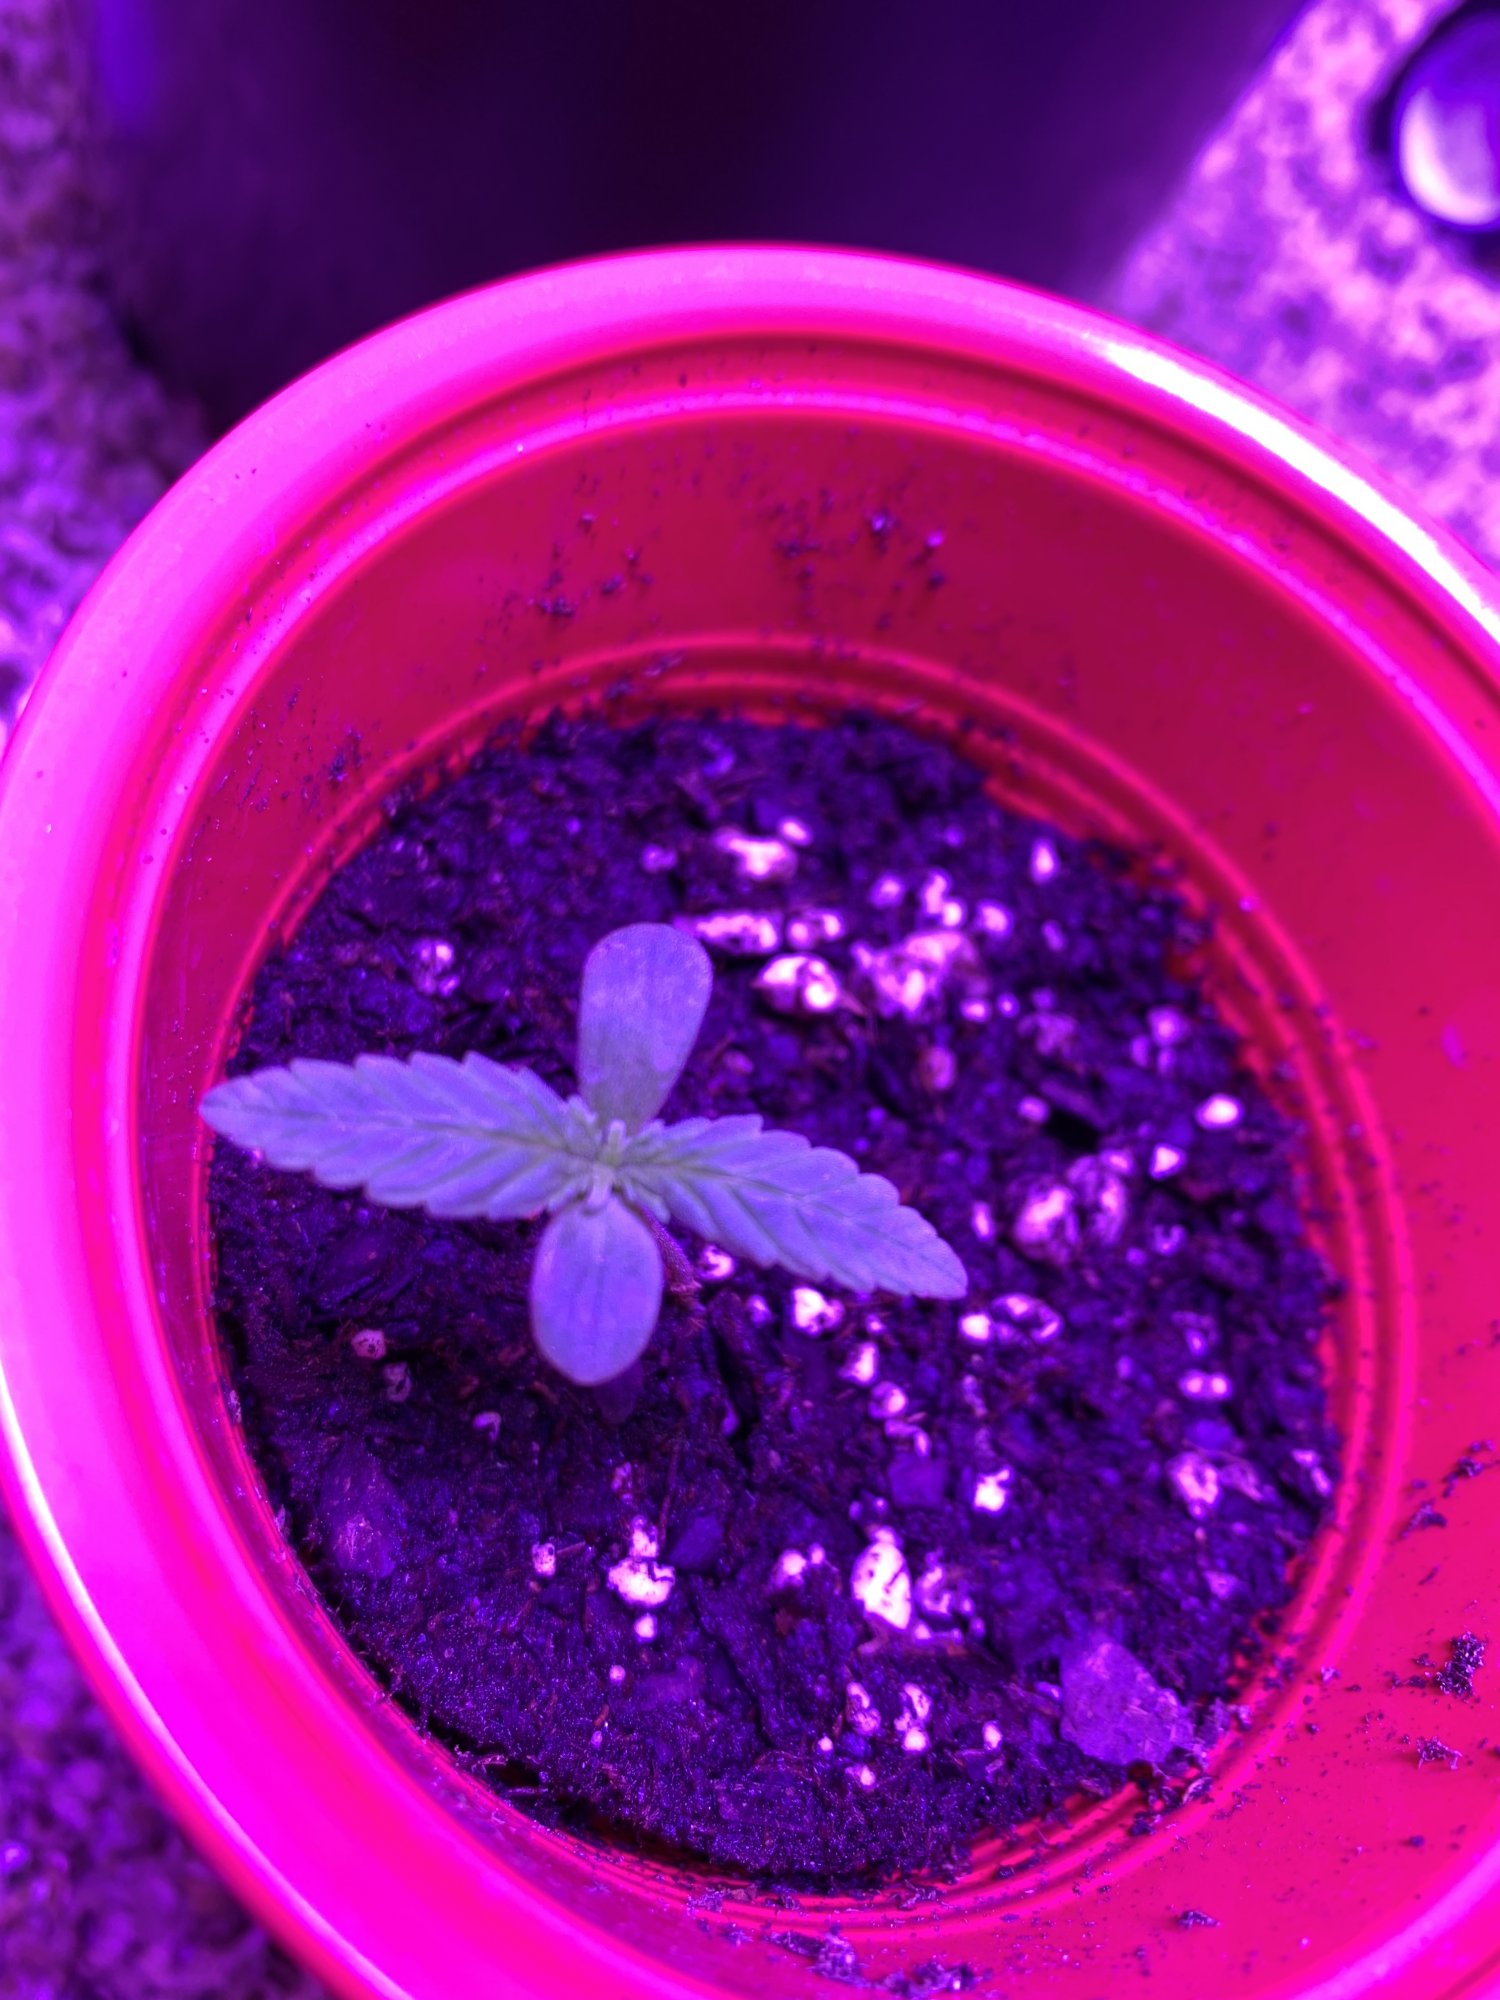 Need advice as soon as possible plants are in critical condition 5